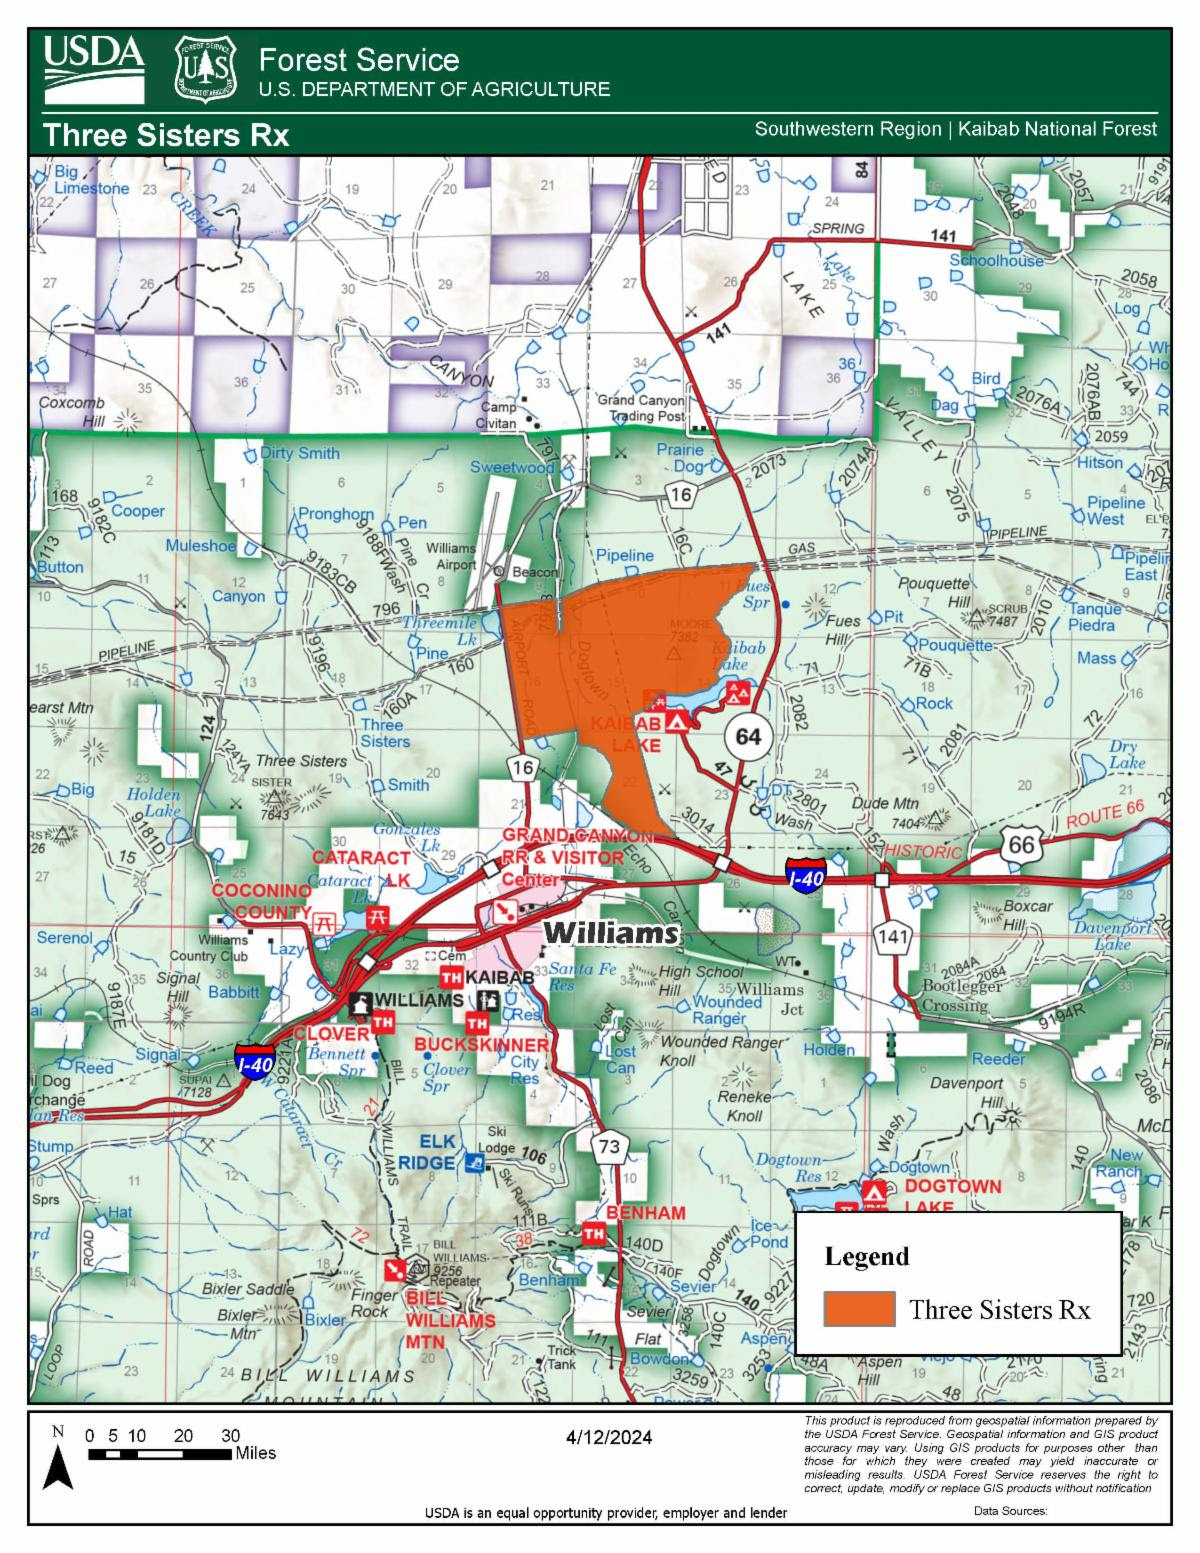 Map identifying the area of the Three Sisters prescribed fire project